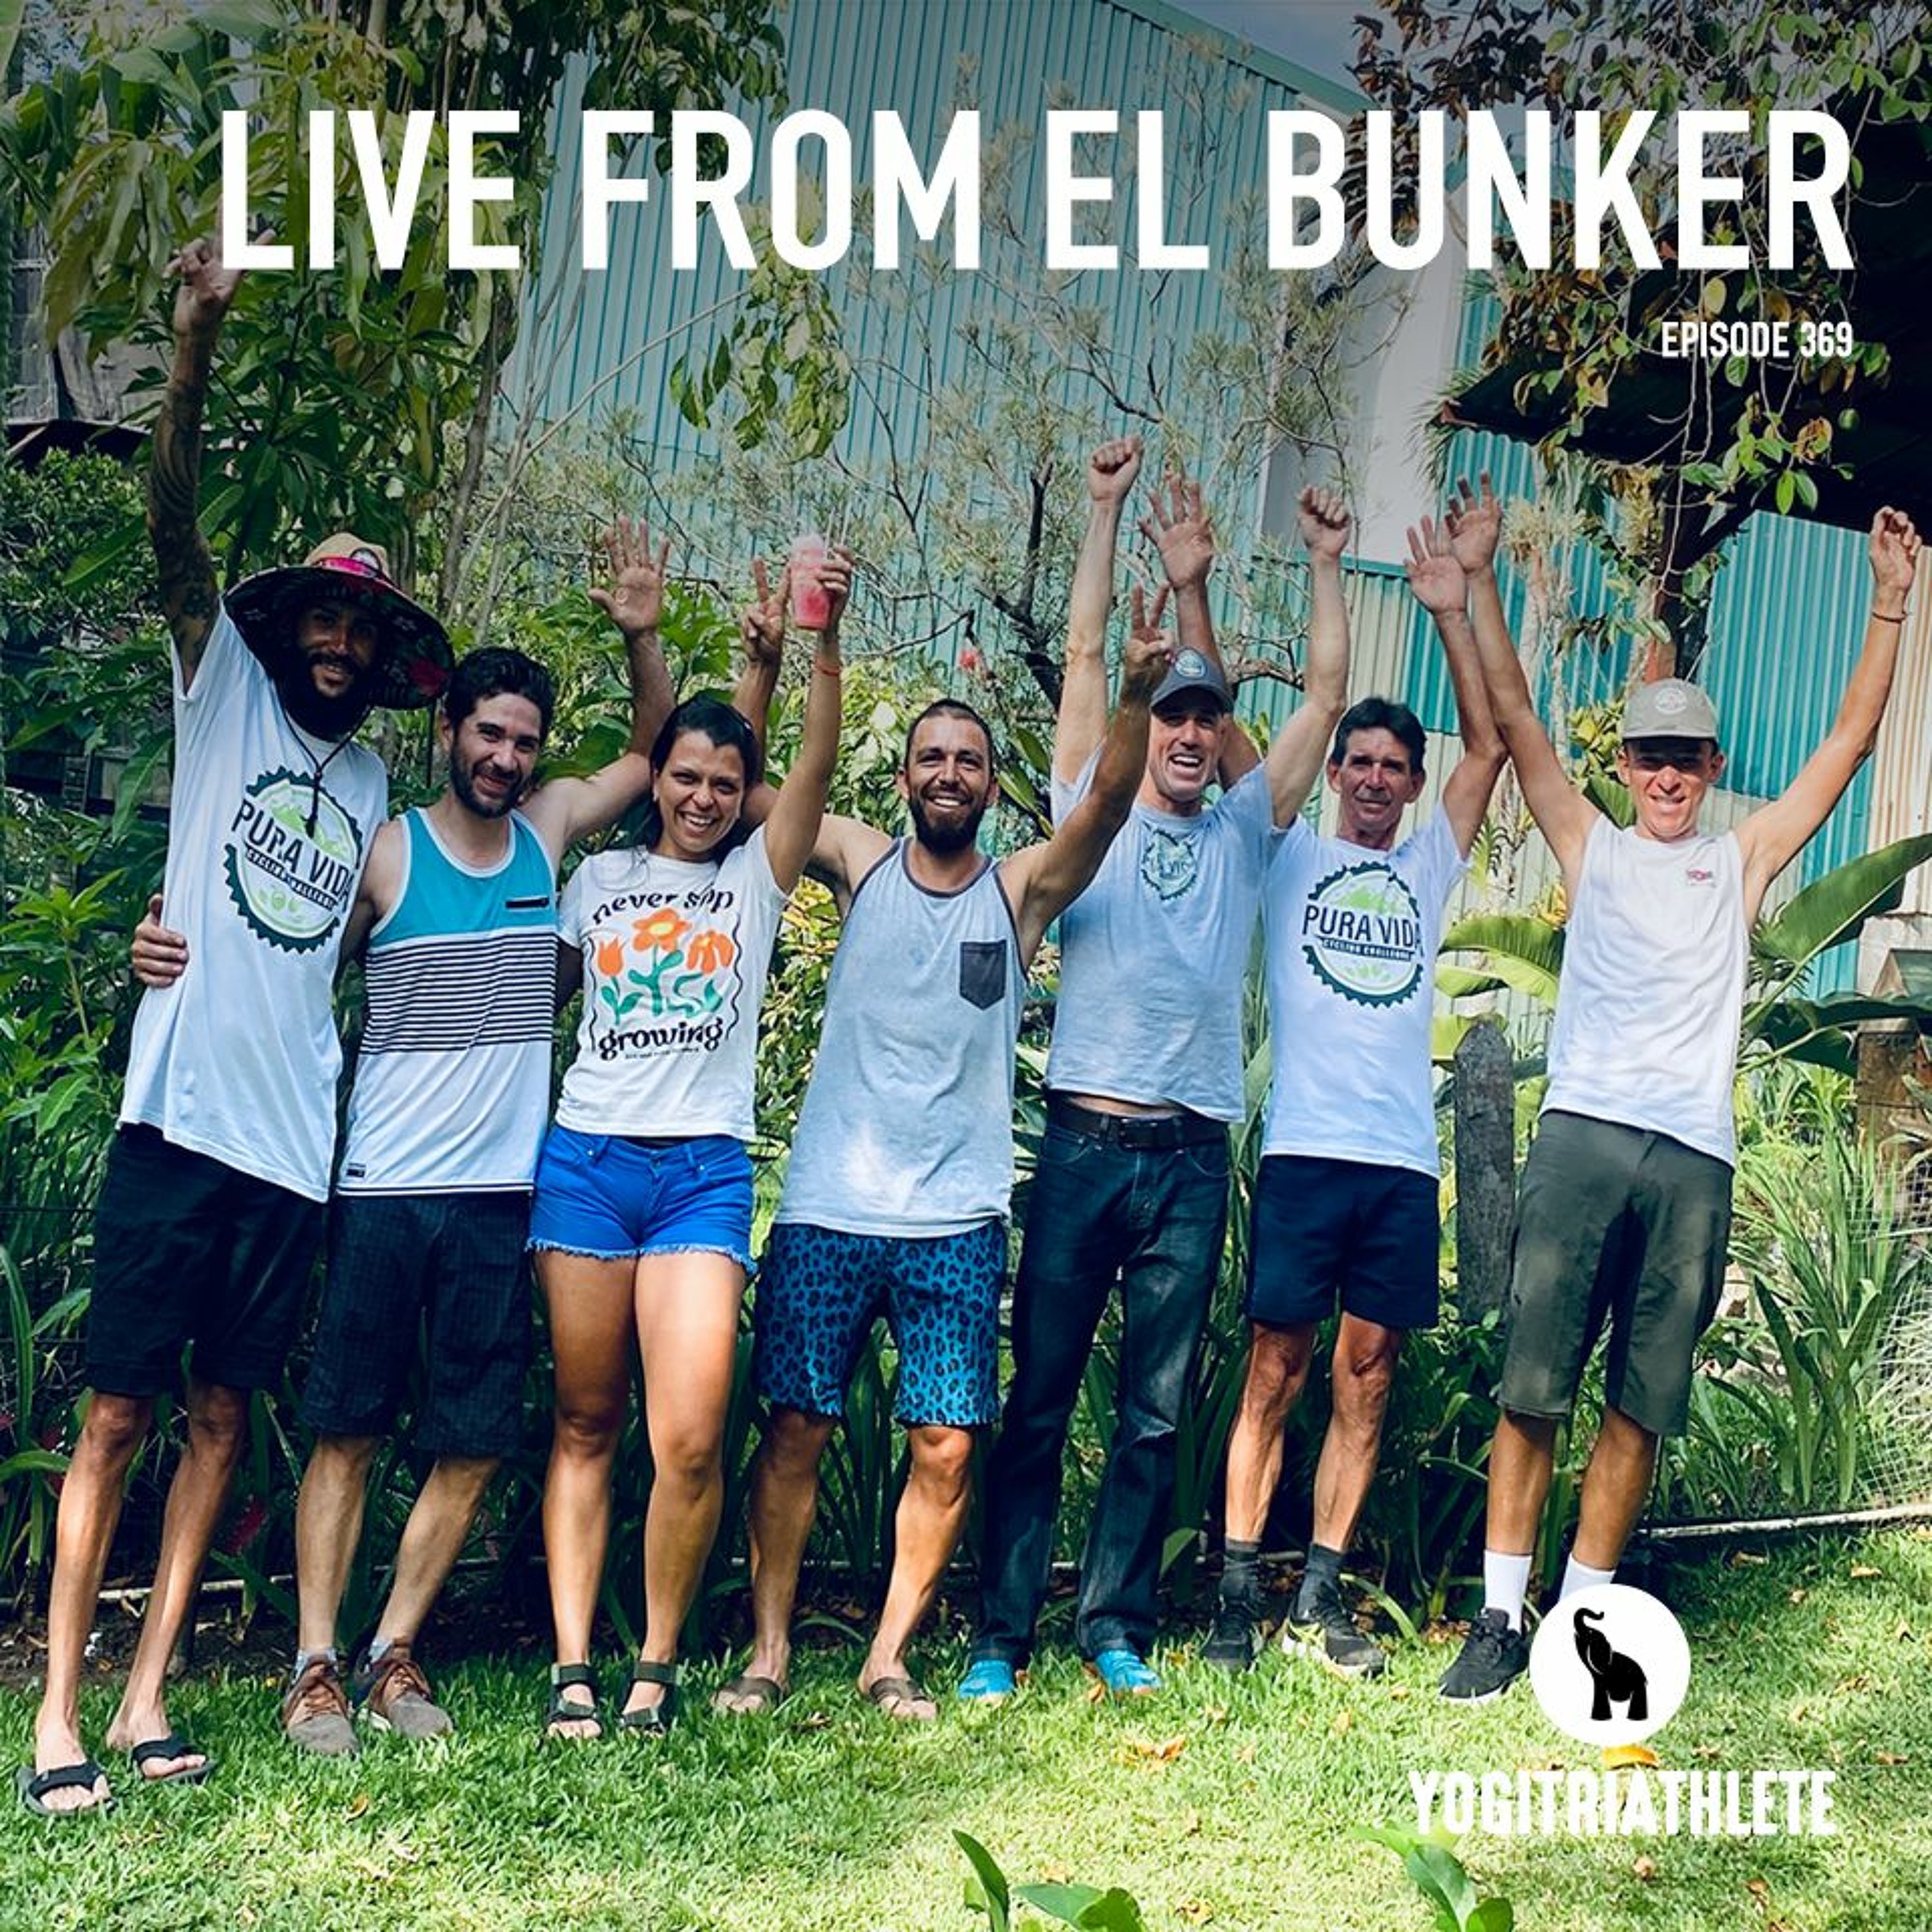 LIVE from El Bunker & The Pura Vida Cycling Charity Event